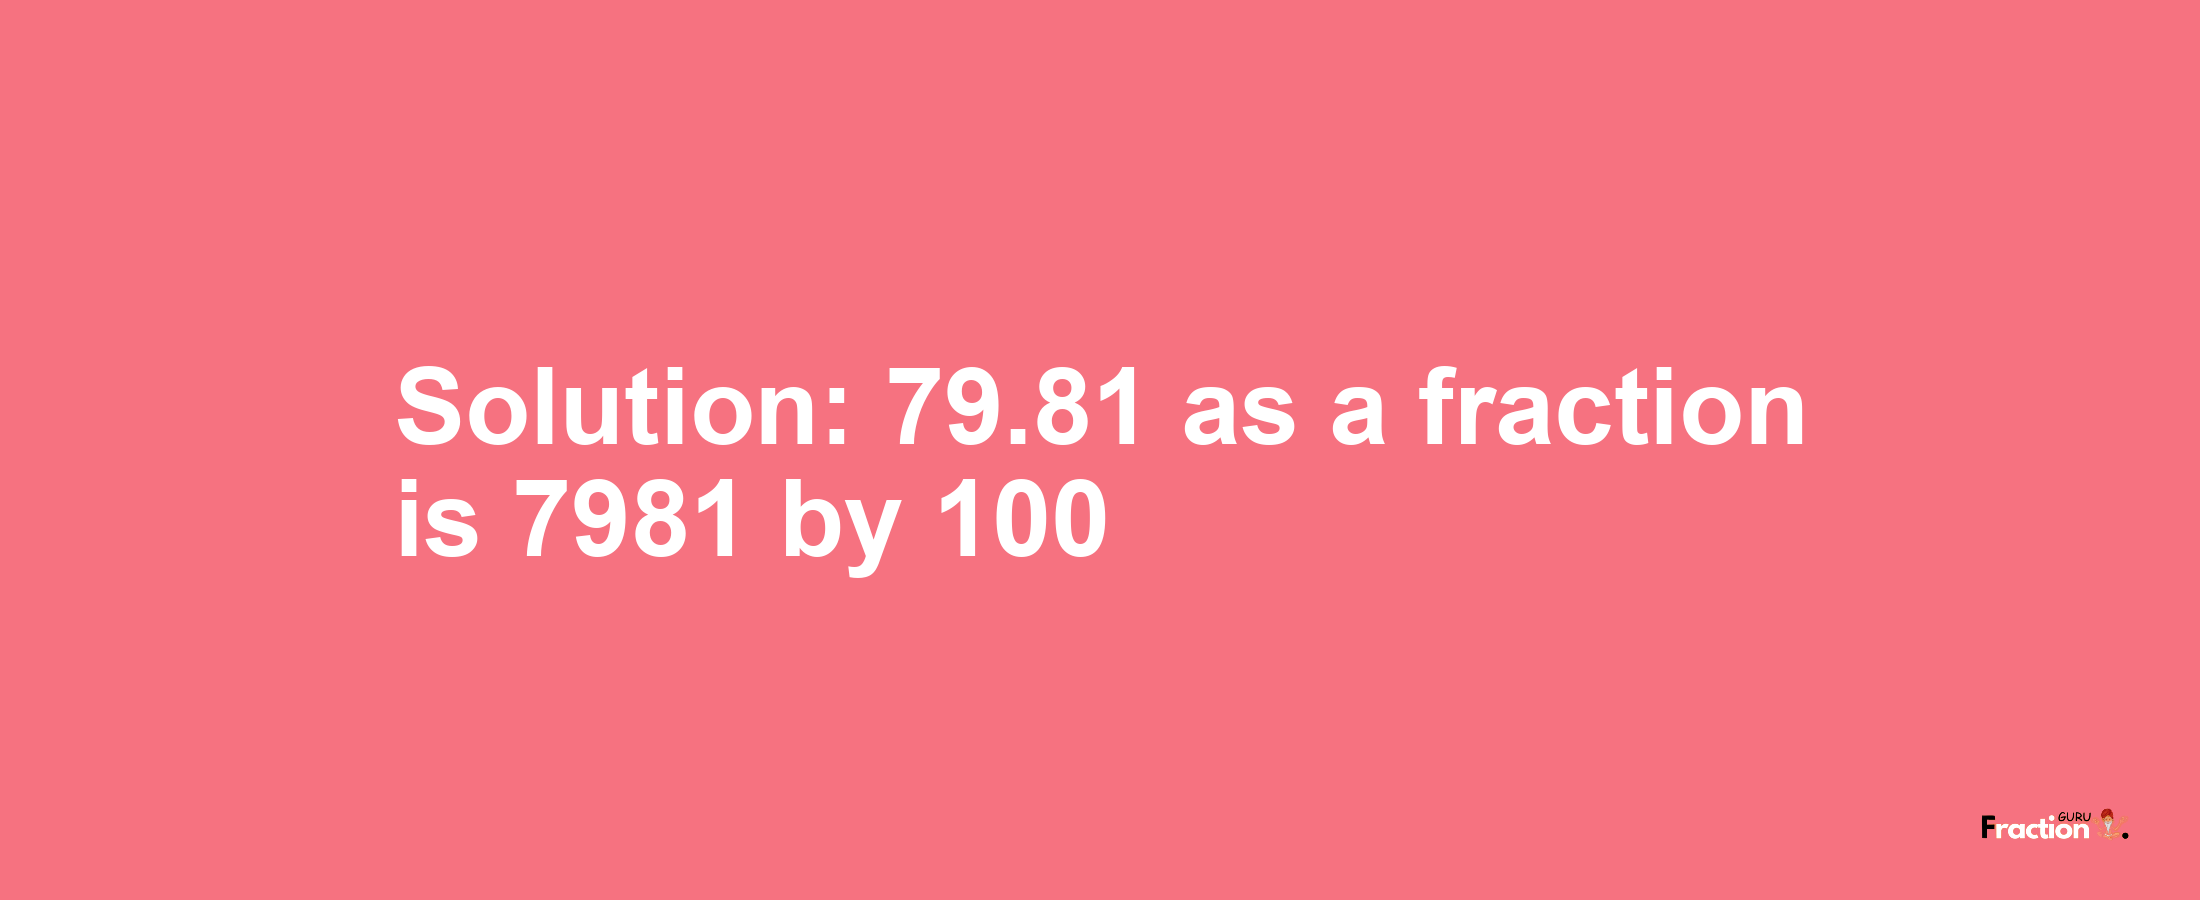 Solution:79.81 as a fraction is 7981/100